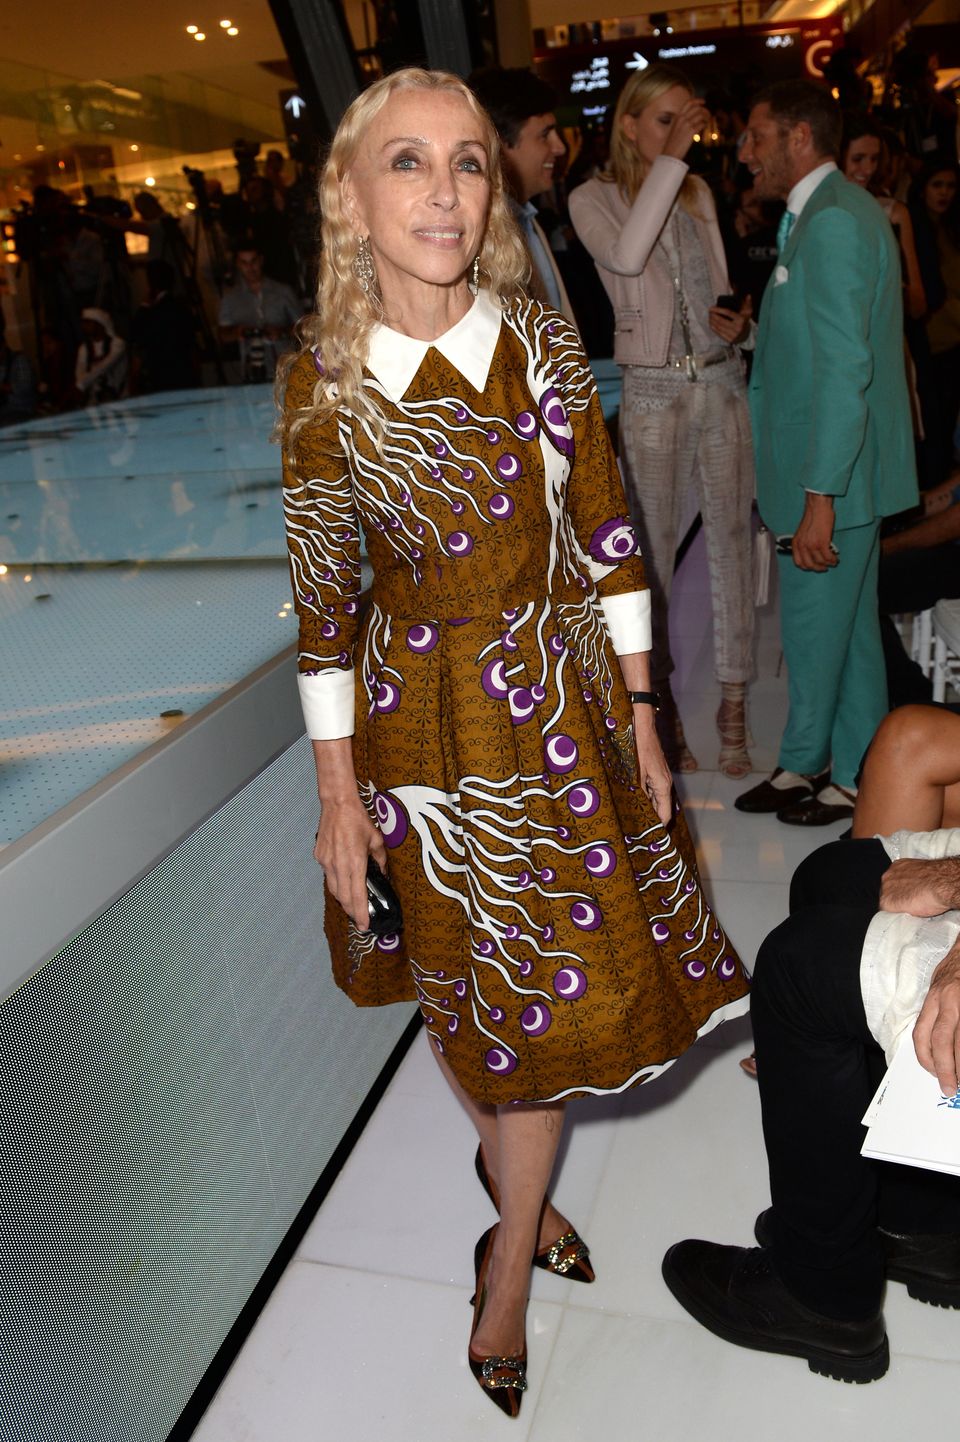 A Look Back At Franca Sozzani's Iconic Style | HuffPost Life